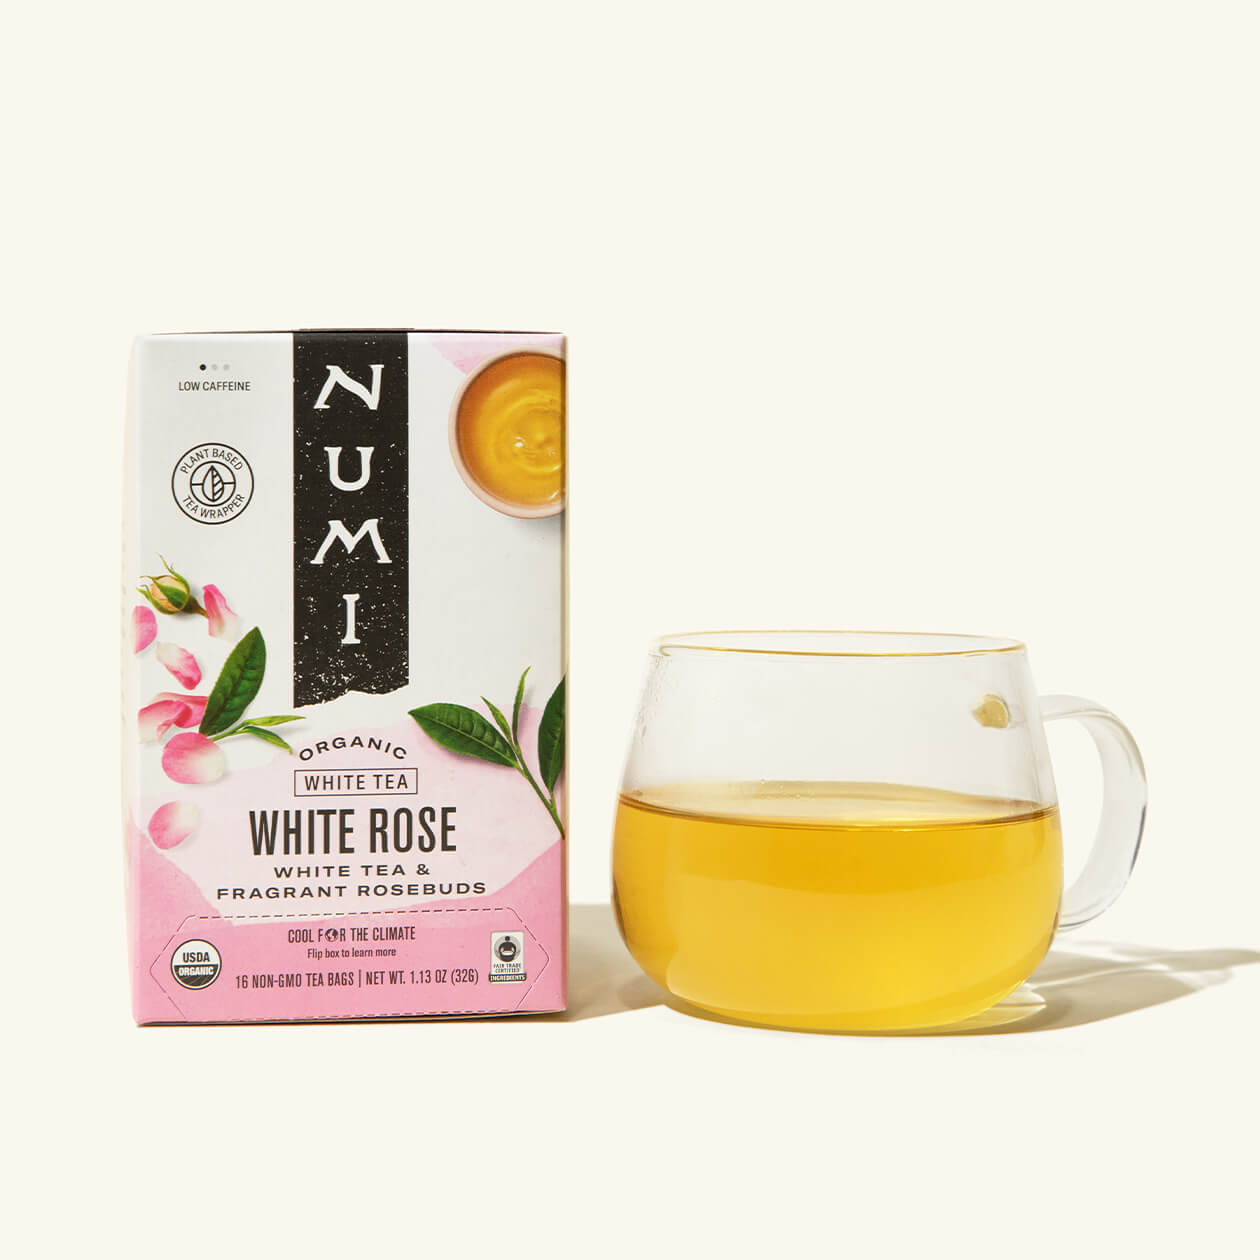 A box of Numi's White Rose next to a brewed cup of tea in a clear cup